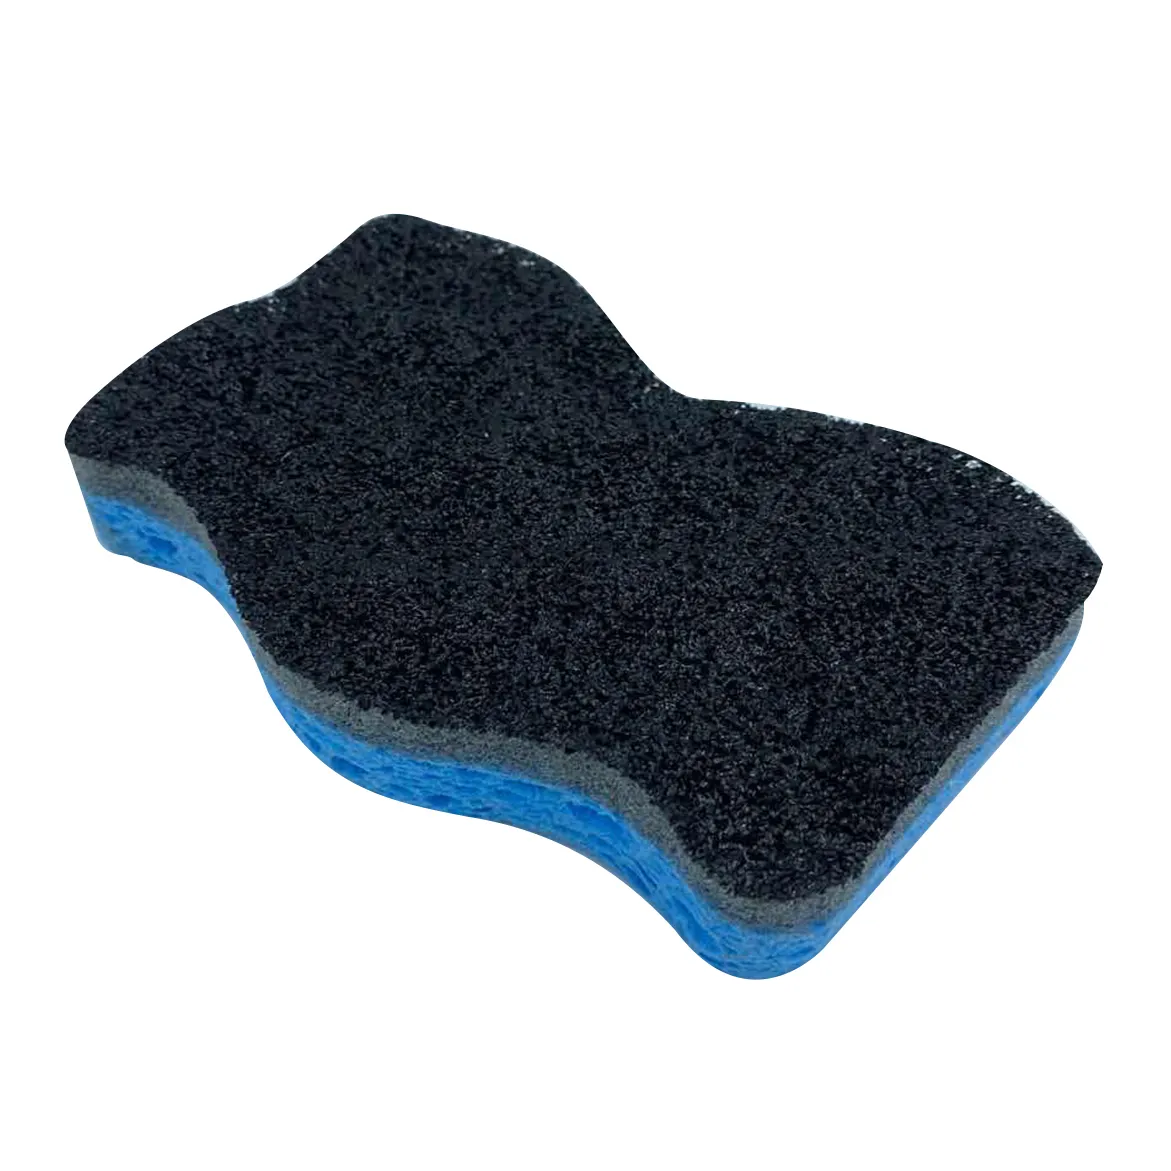 DH-A5-2 cleaning large compress cellulose sponge cheap compressed cellulose sponge